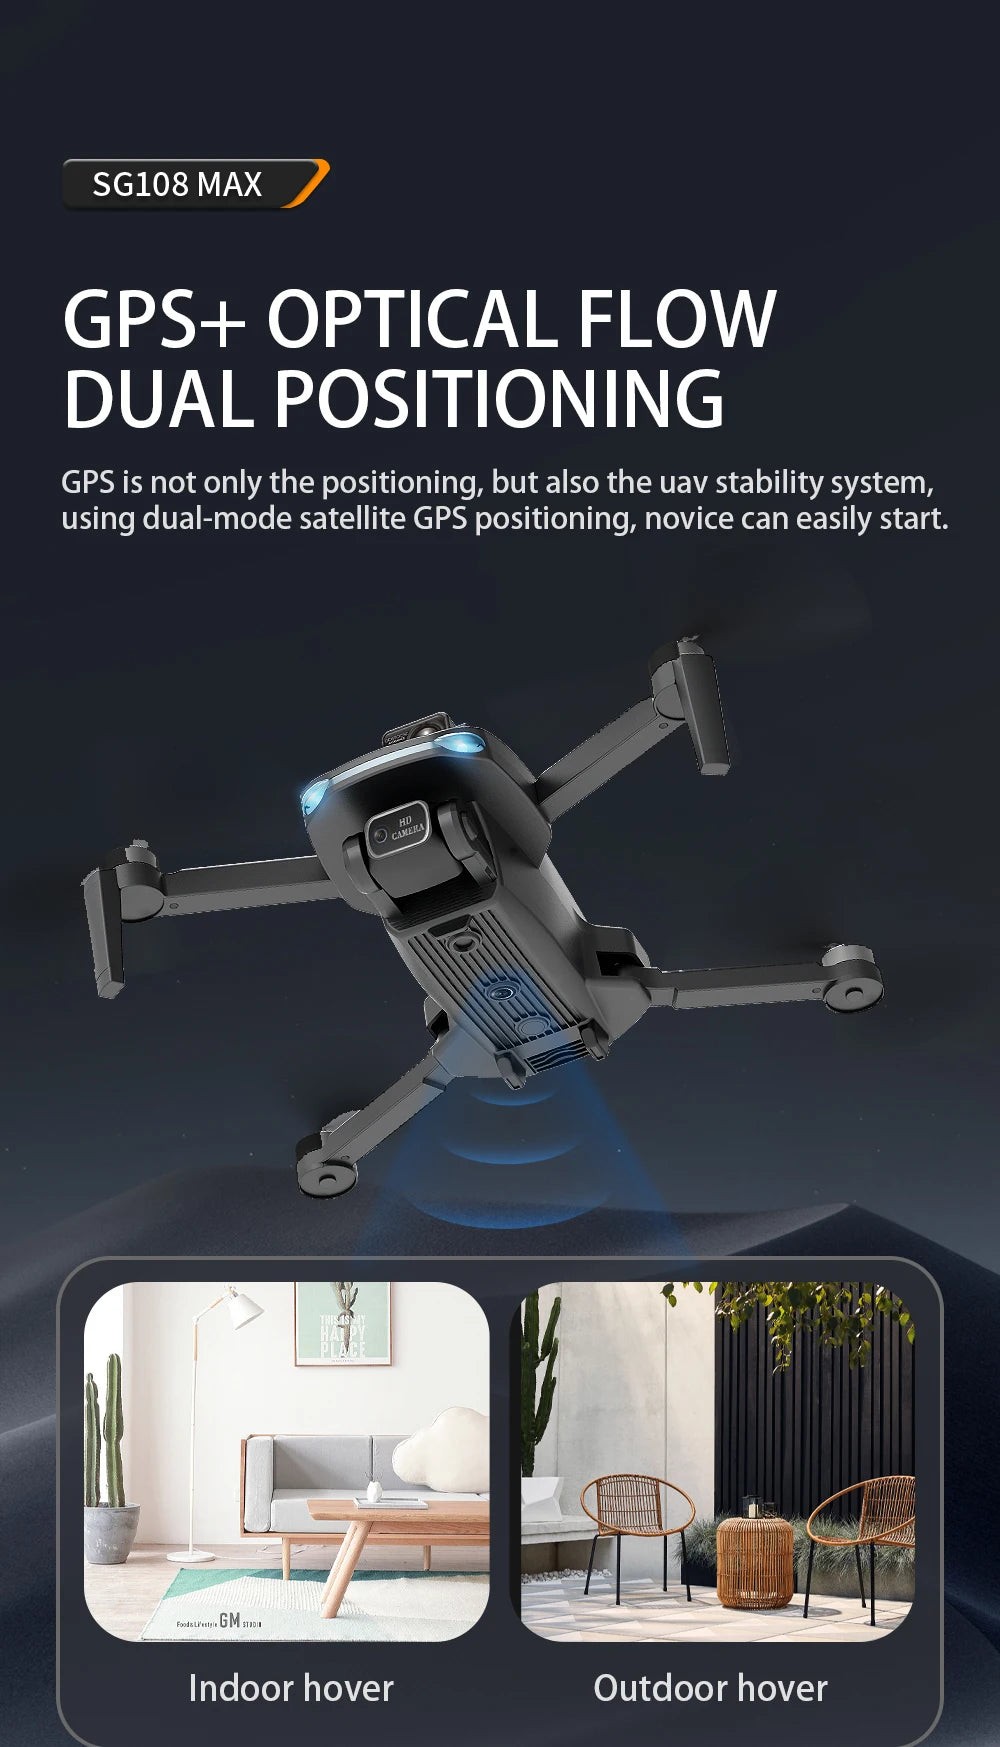 G108 Pro MAx Drone, SG108 MAX GPS+ OPTICAL FLOW DUAL POSITIONING